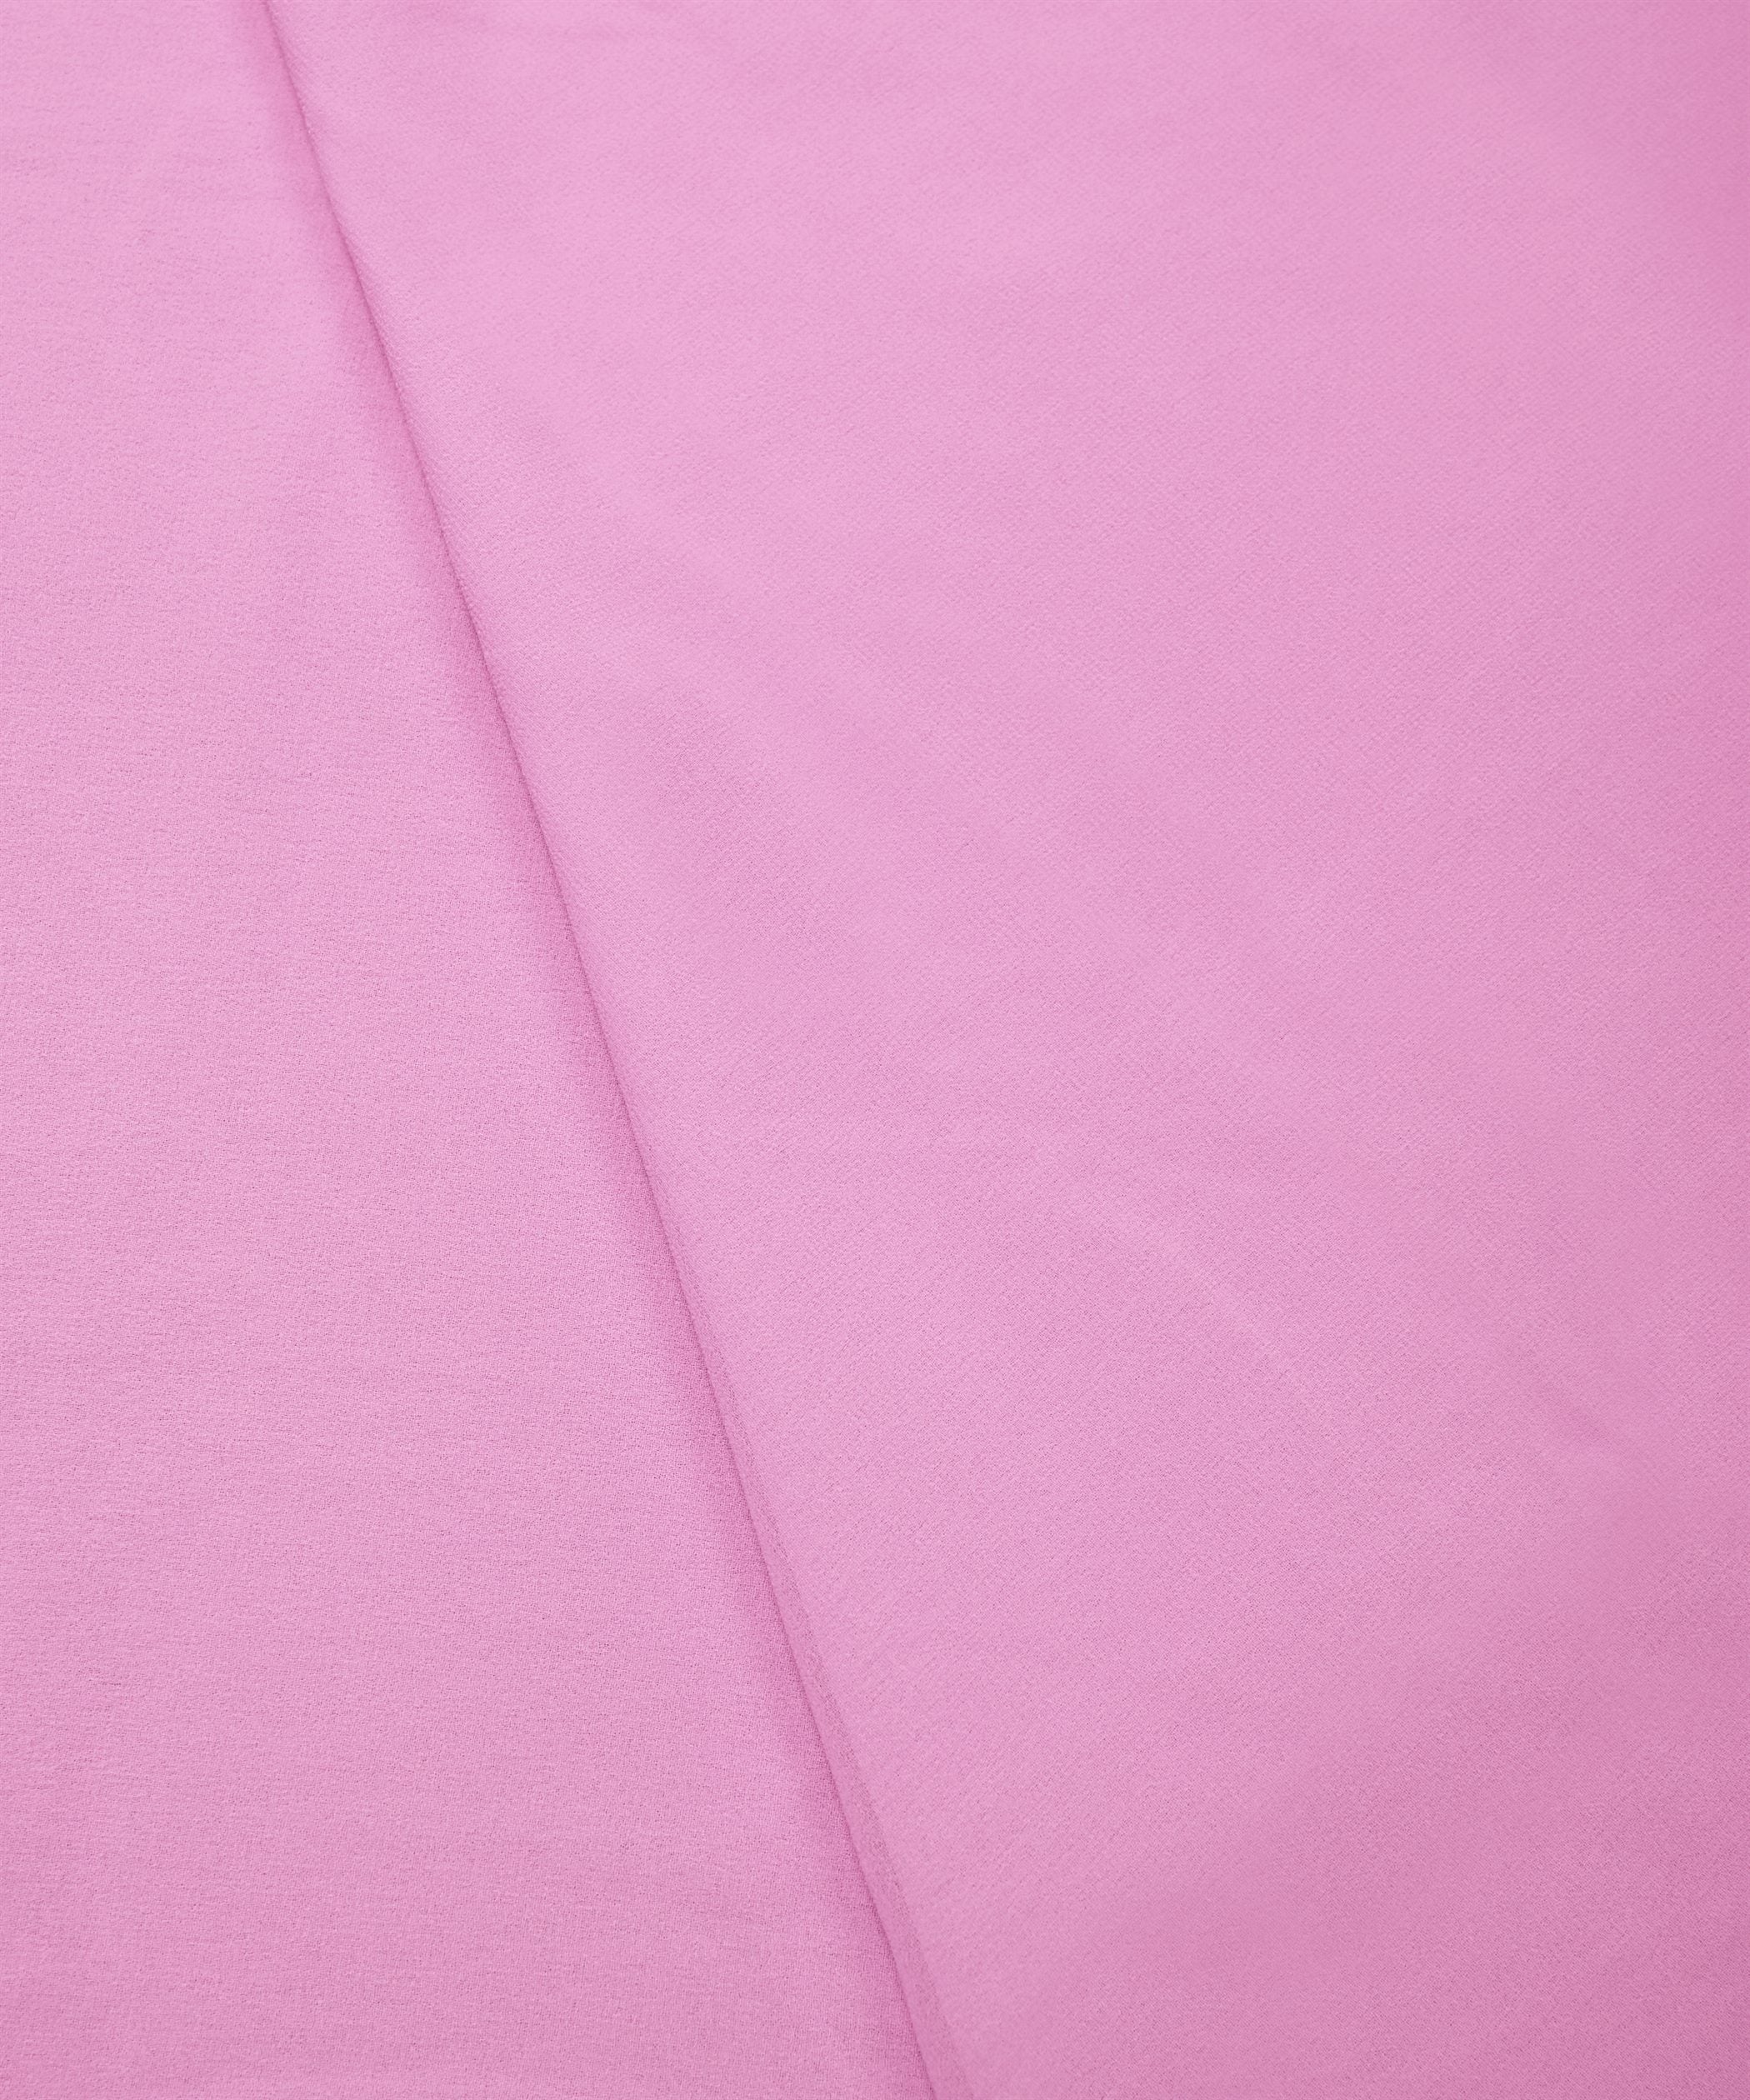 Pink Plain Dyed Georgette (60 Grams) Fabric